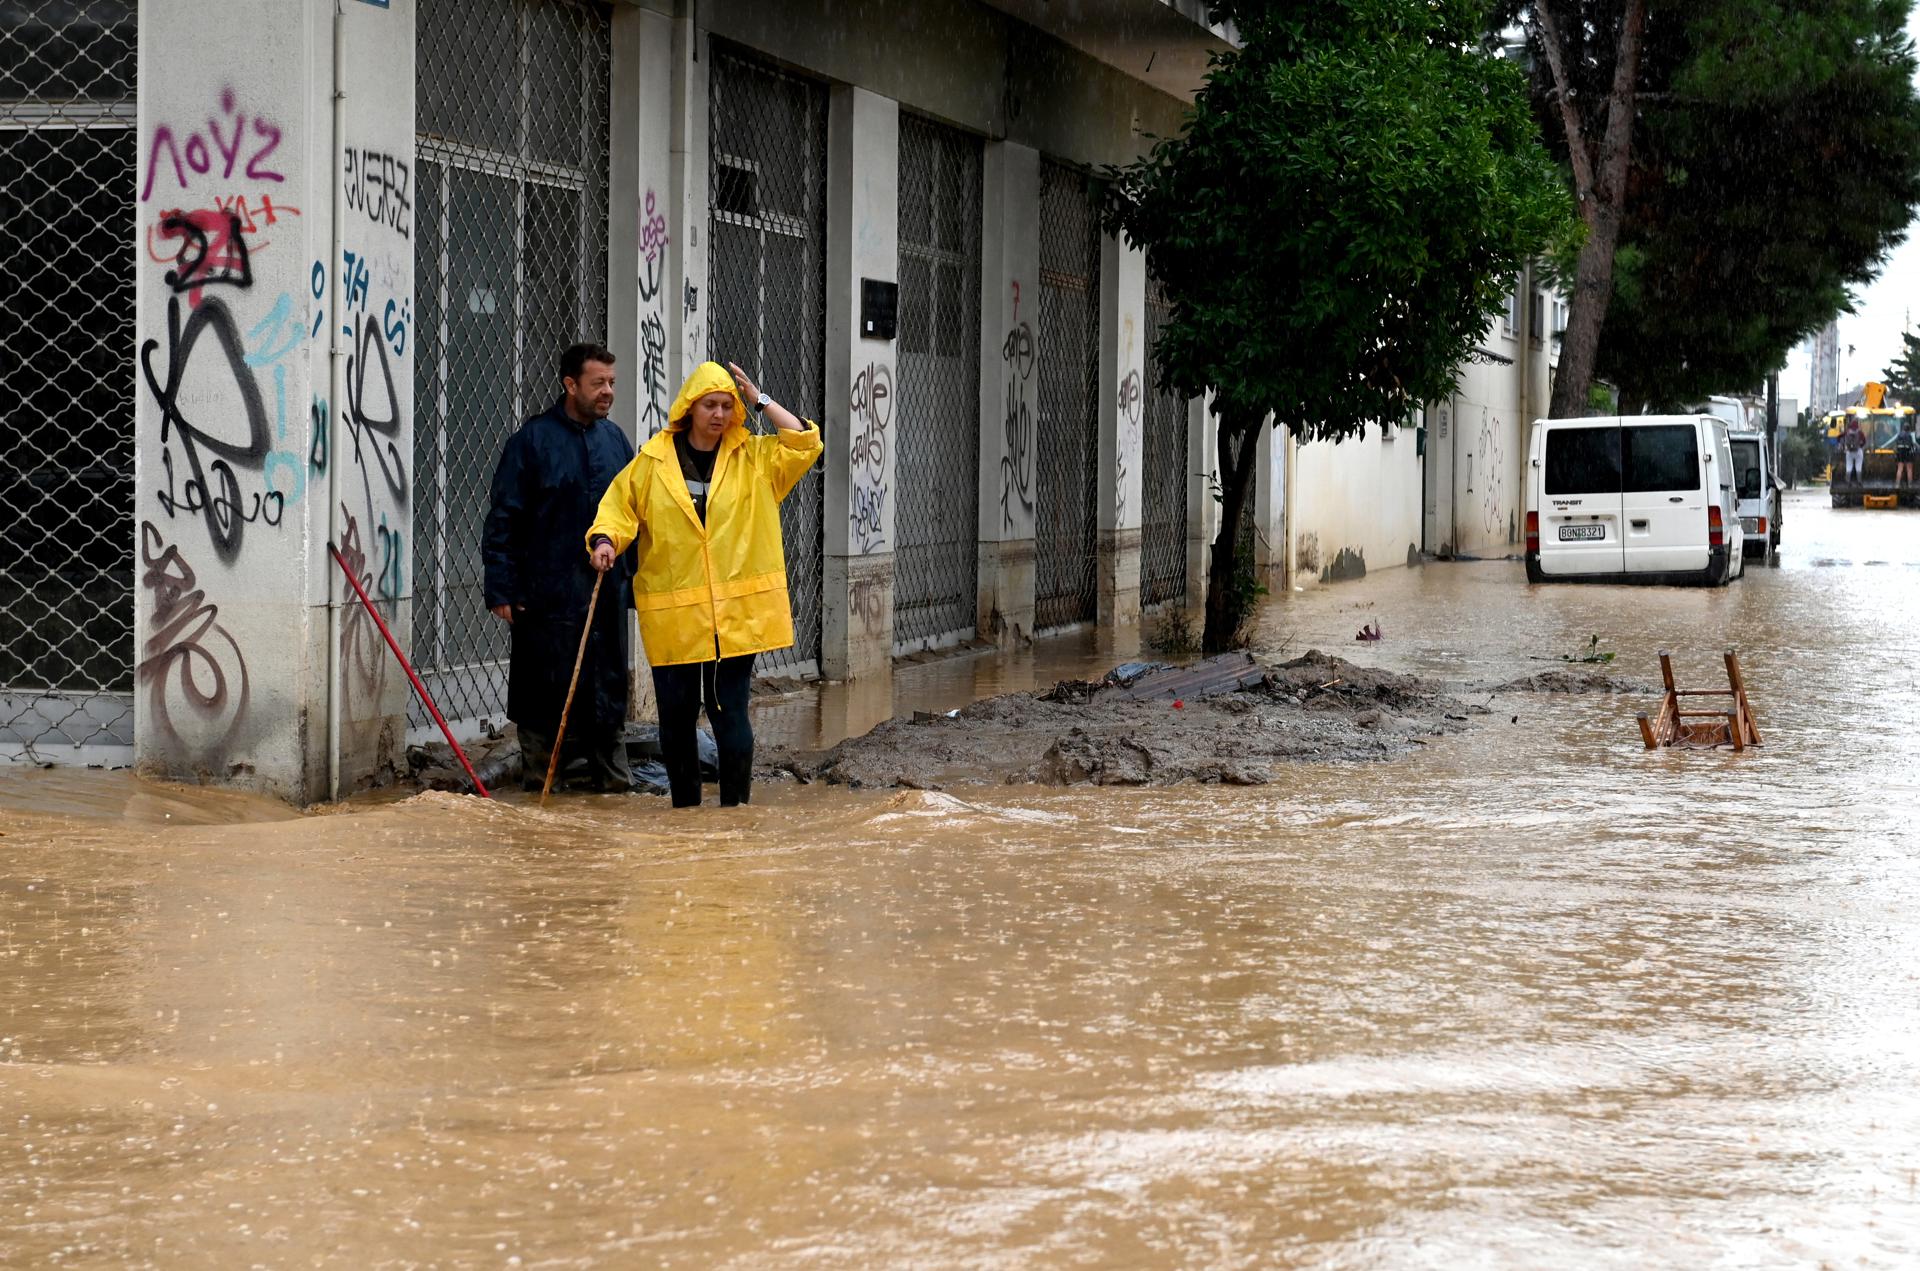 Civilians try to cross the flooded road after the storm named Daniel, in the area of Volos, Magnesia, Greece, 07 September 2023. EFE/EPA/HATZIPOLITIS NICOLAOS